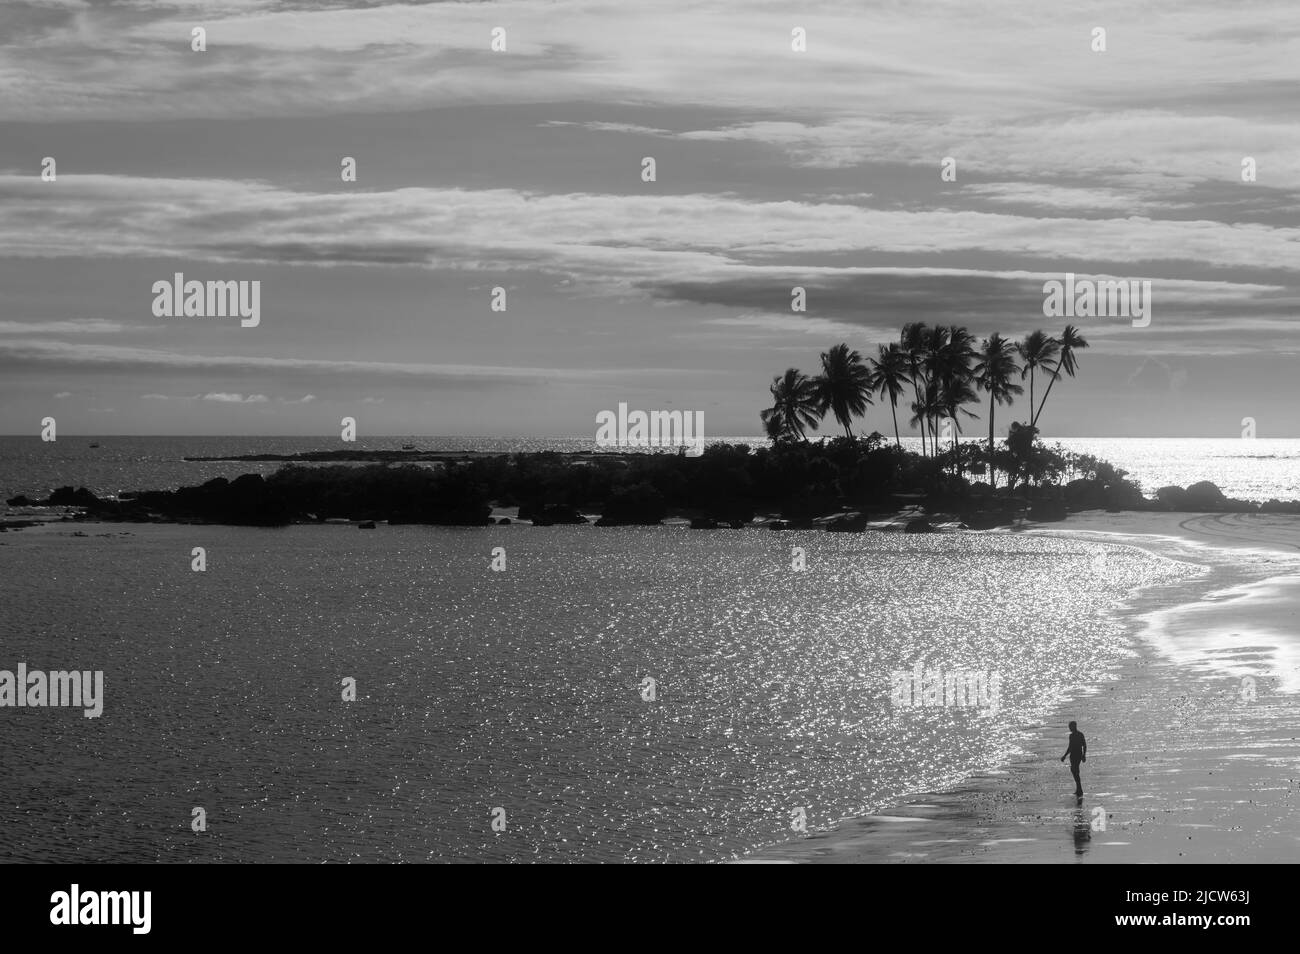 landscape of a beach in black and white Stock Photo